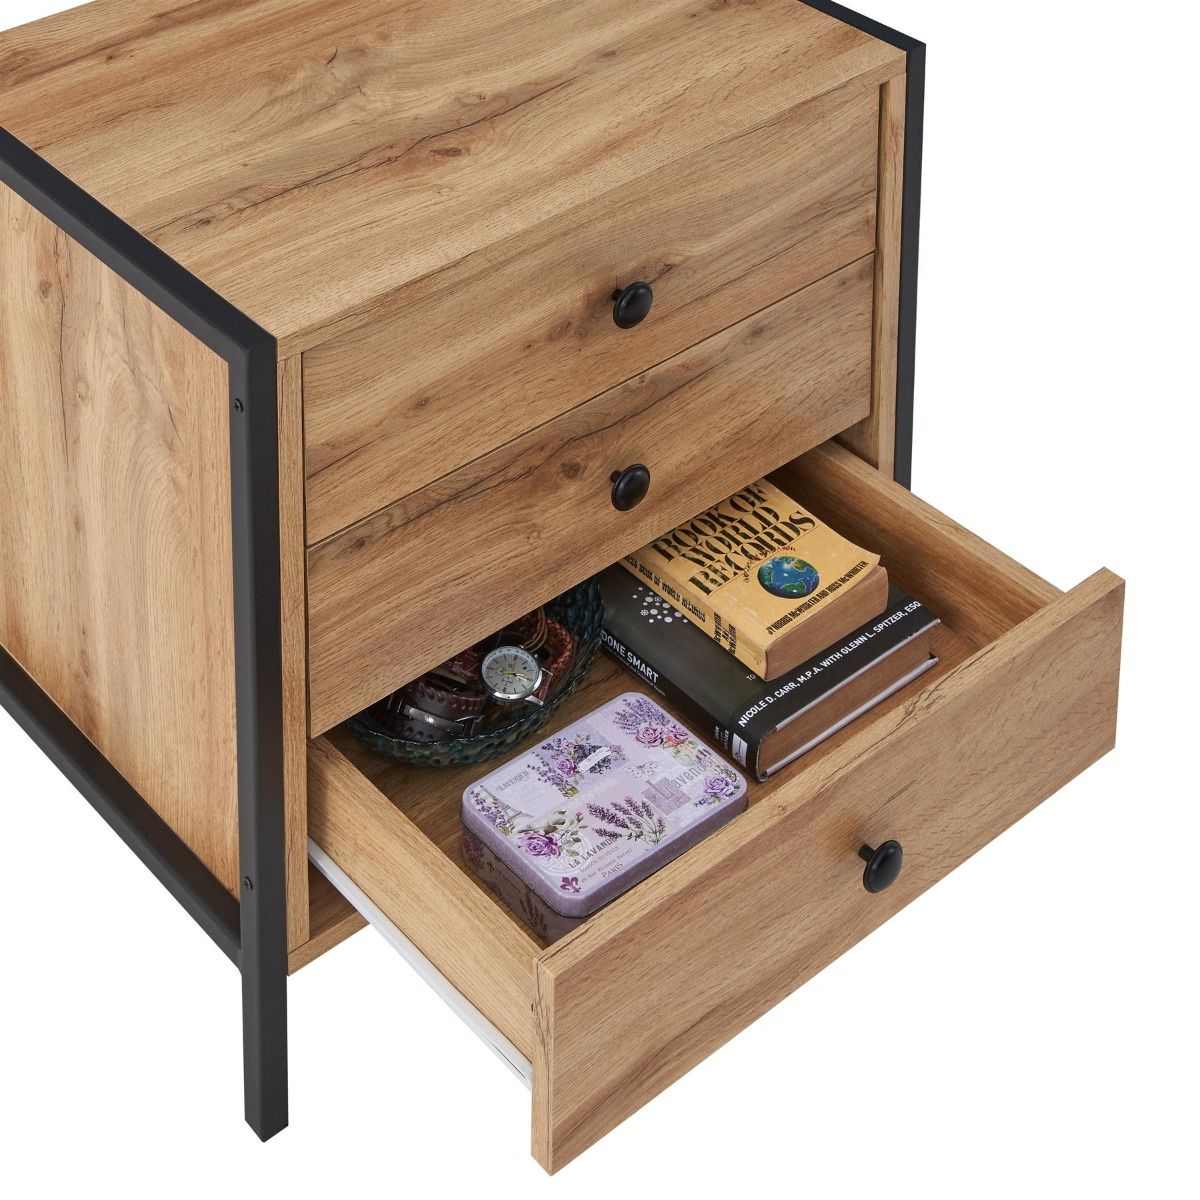 Woburn Bedside Table with 3 Drawers